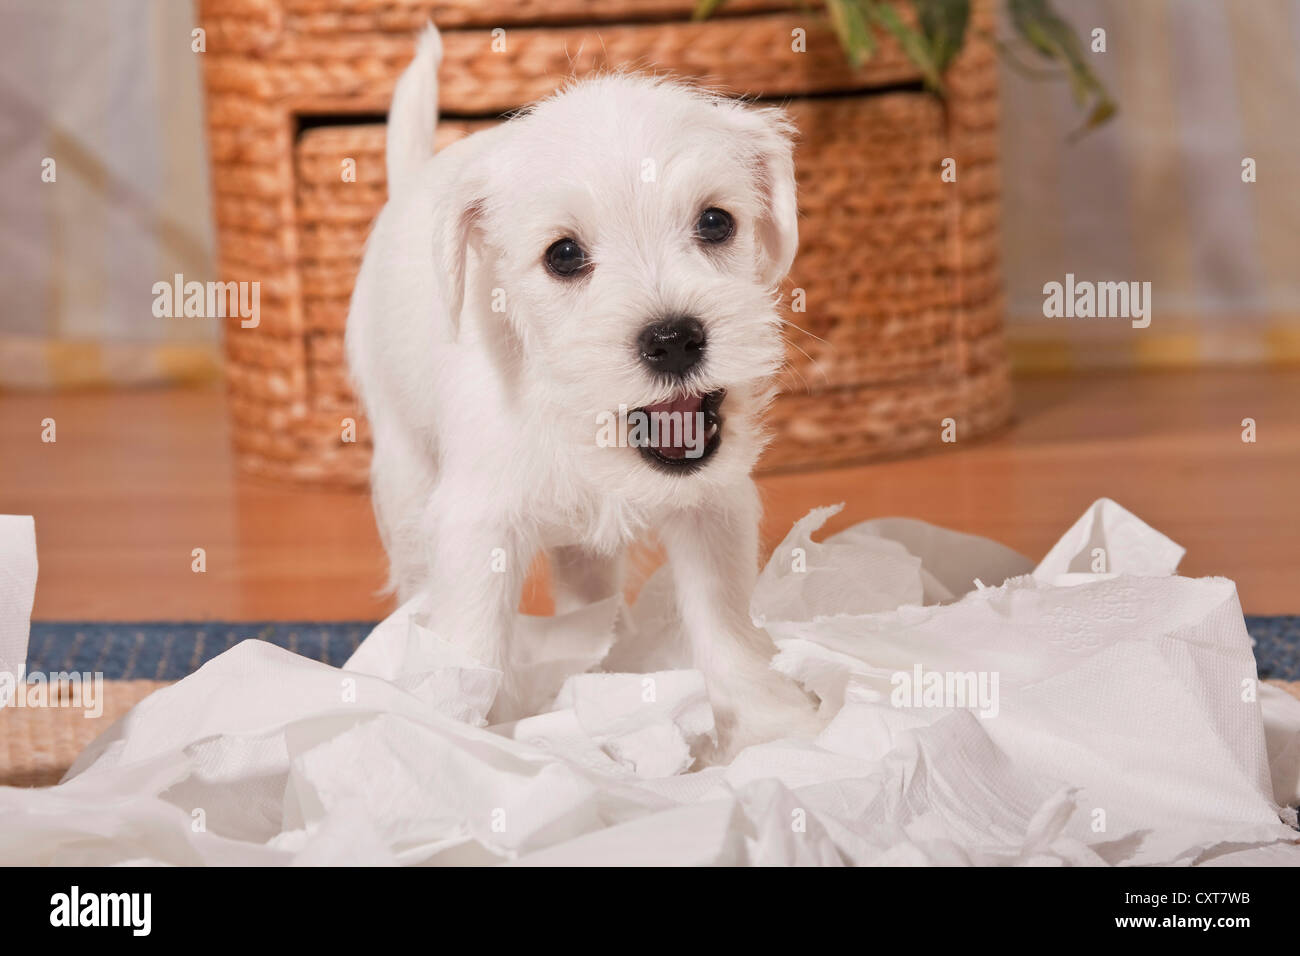 Cheeky white Miniature Schnauzer puppy surrounded by shredded toilet paper Stock Photo